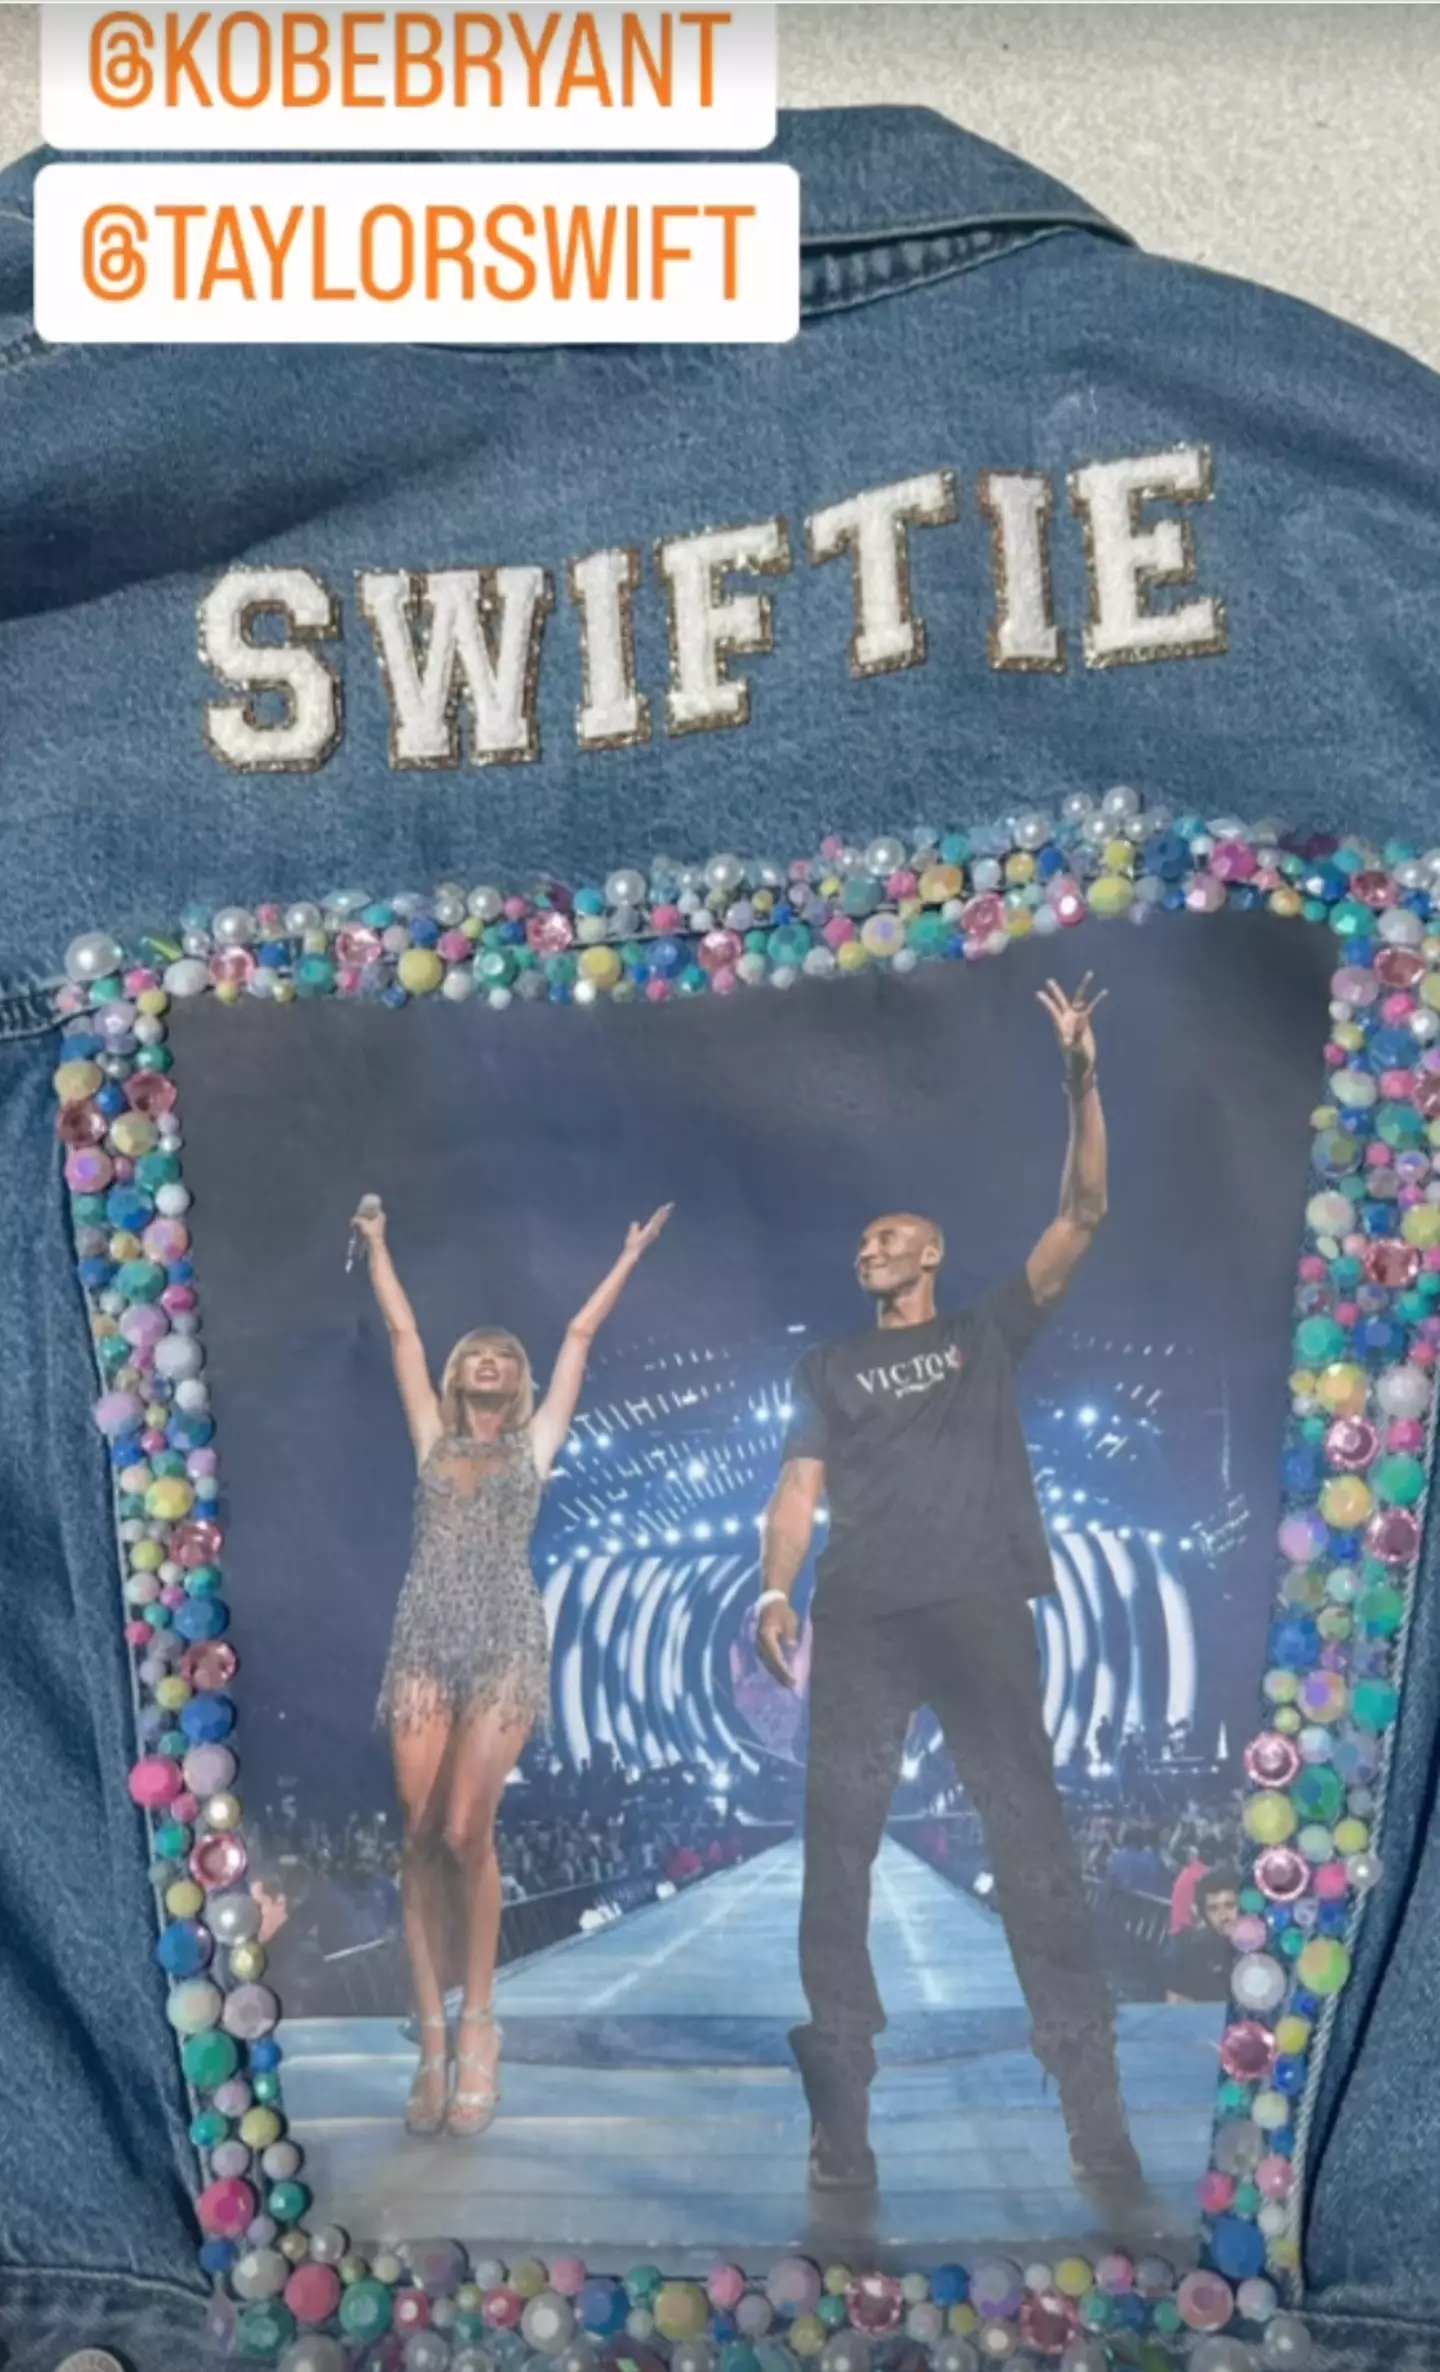 She even shared a photo of the bedazzled jacket.